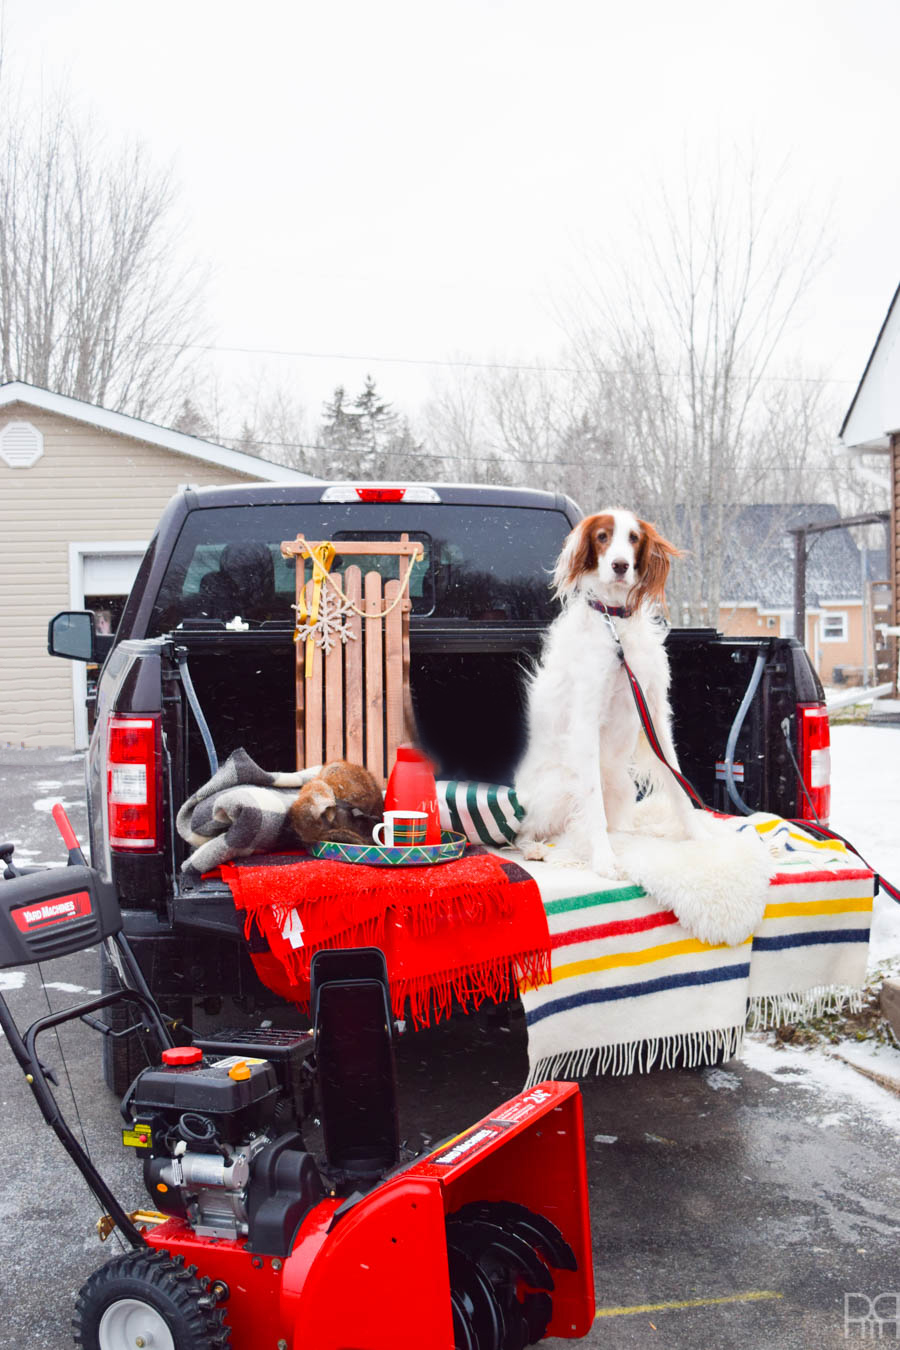 Conquer your winter blues and head outside to enjoy mother nature! You'll get to the business of enjoying the great outdoors so much faster when you've got a snowblower to help power through the ice and snow. Come see what I'm doing to enjoy the Winter